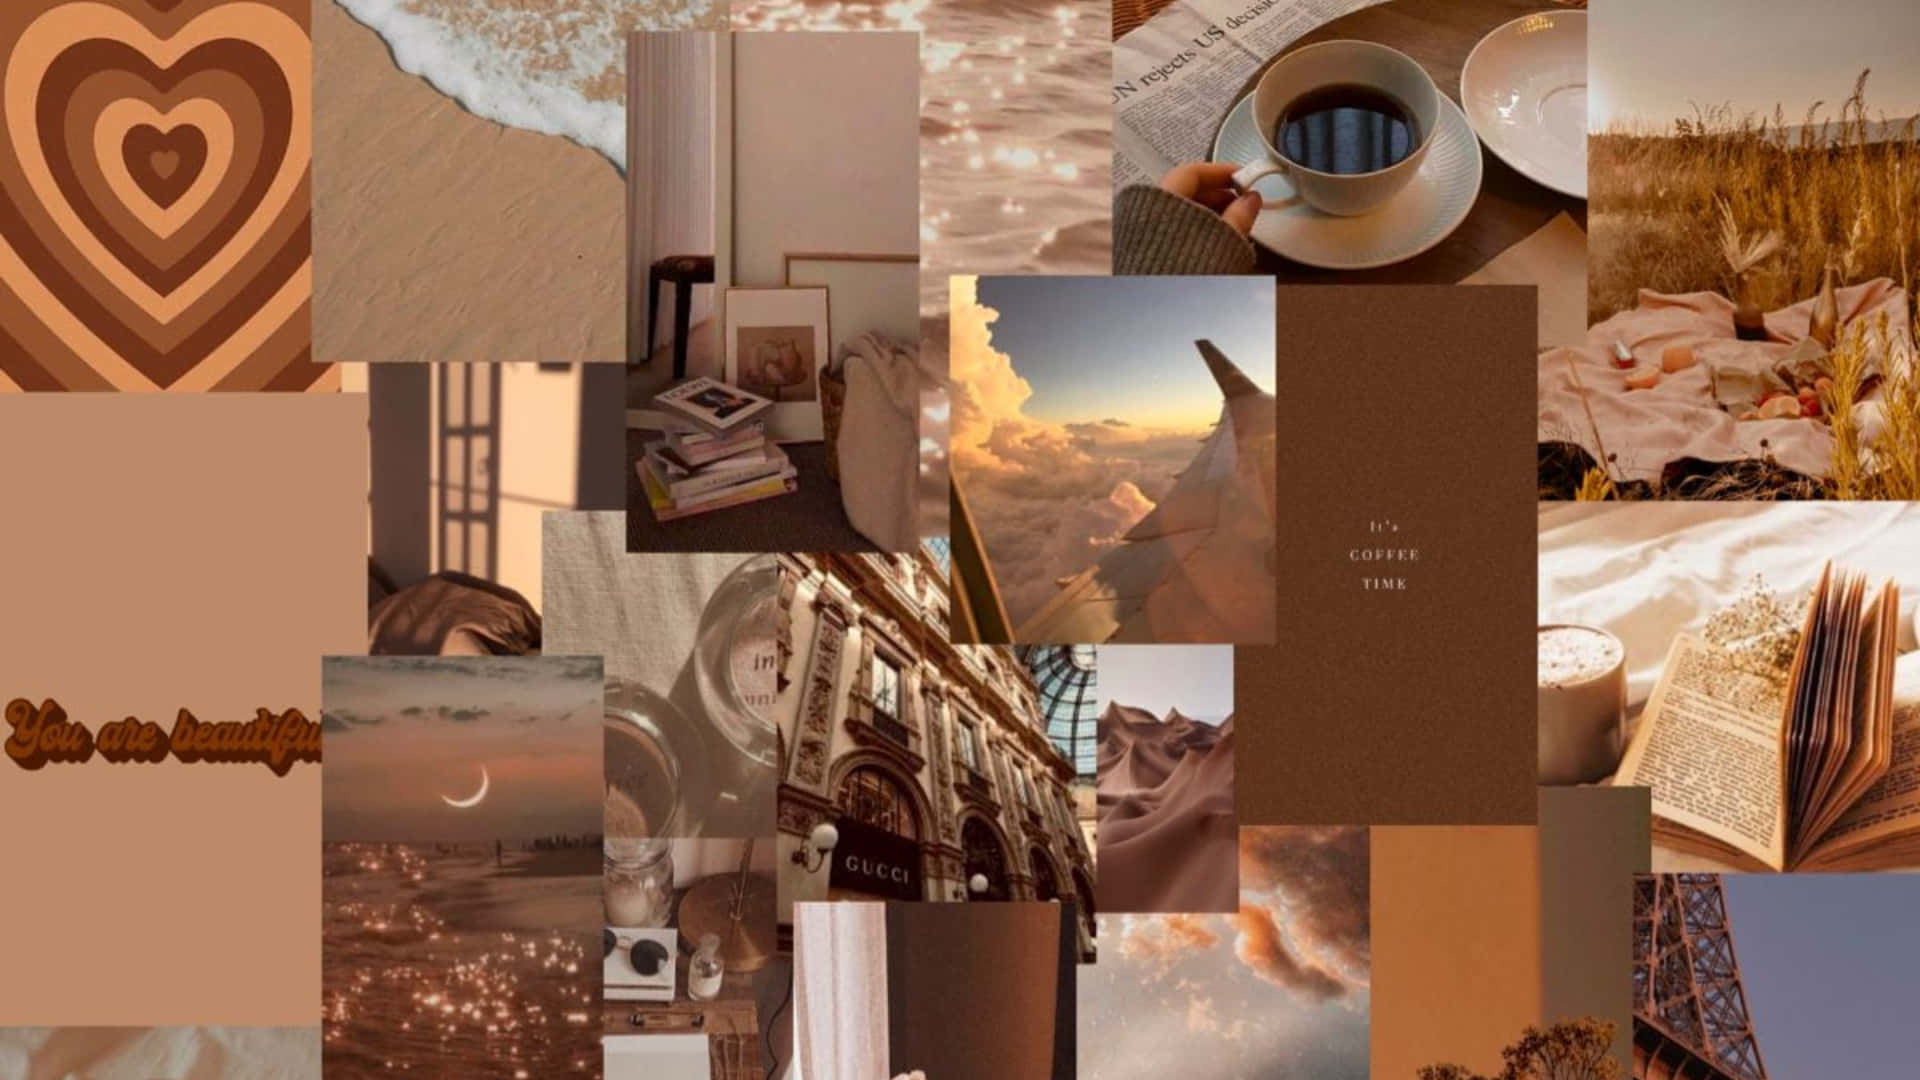 A Collage Of Pictures And Objects In Brown Wallpaper